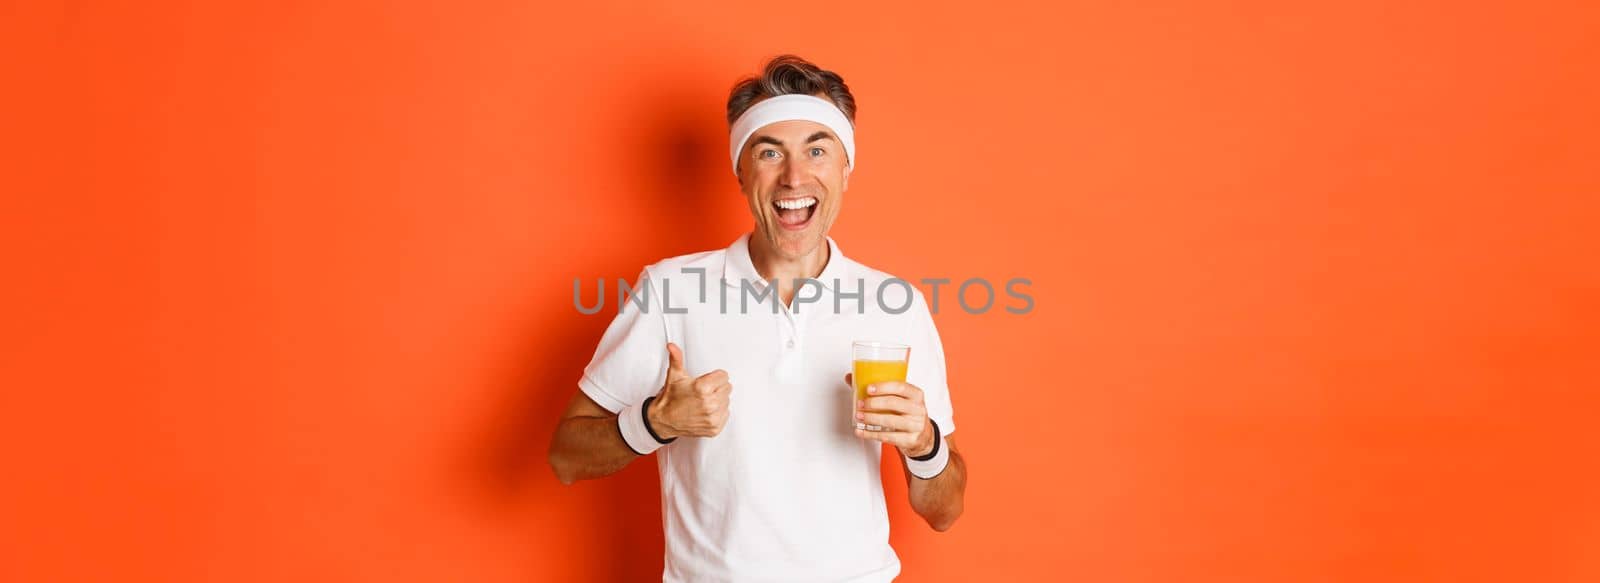 Concept of workout, gym and lifestyle. Image of active and healthy middle-aged sport guy, showing thumbs-up and drinking juice, smiling happy, standing over orange background.